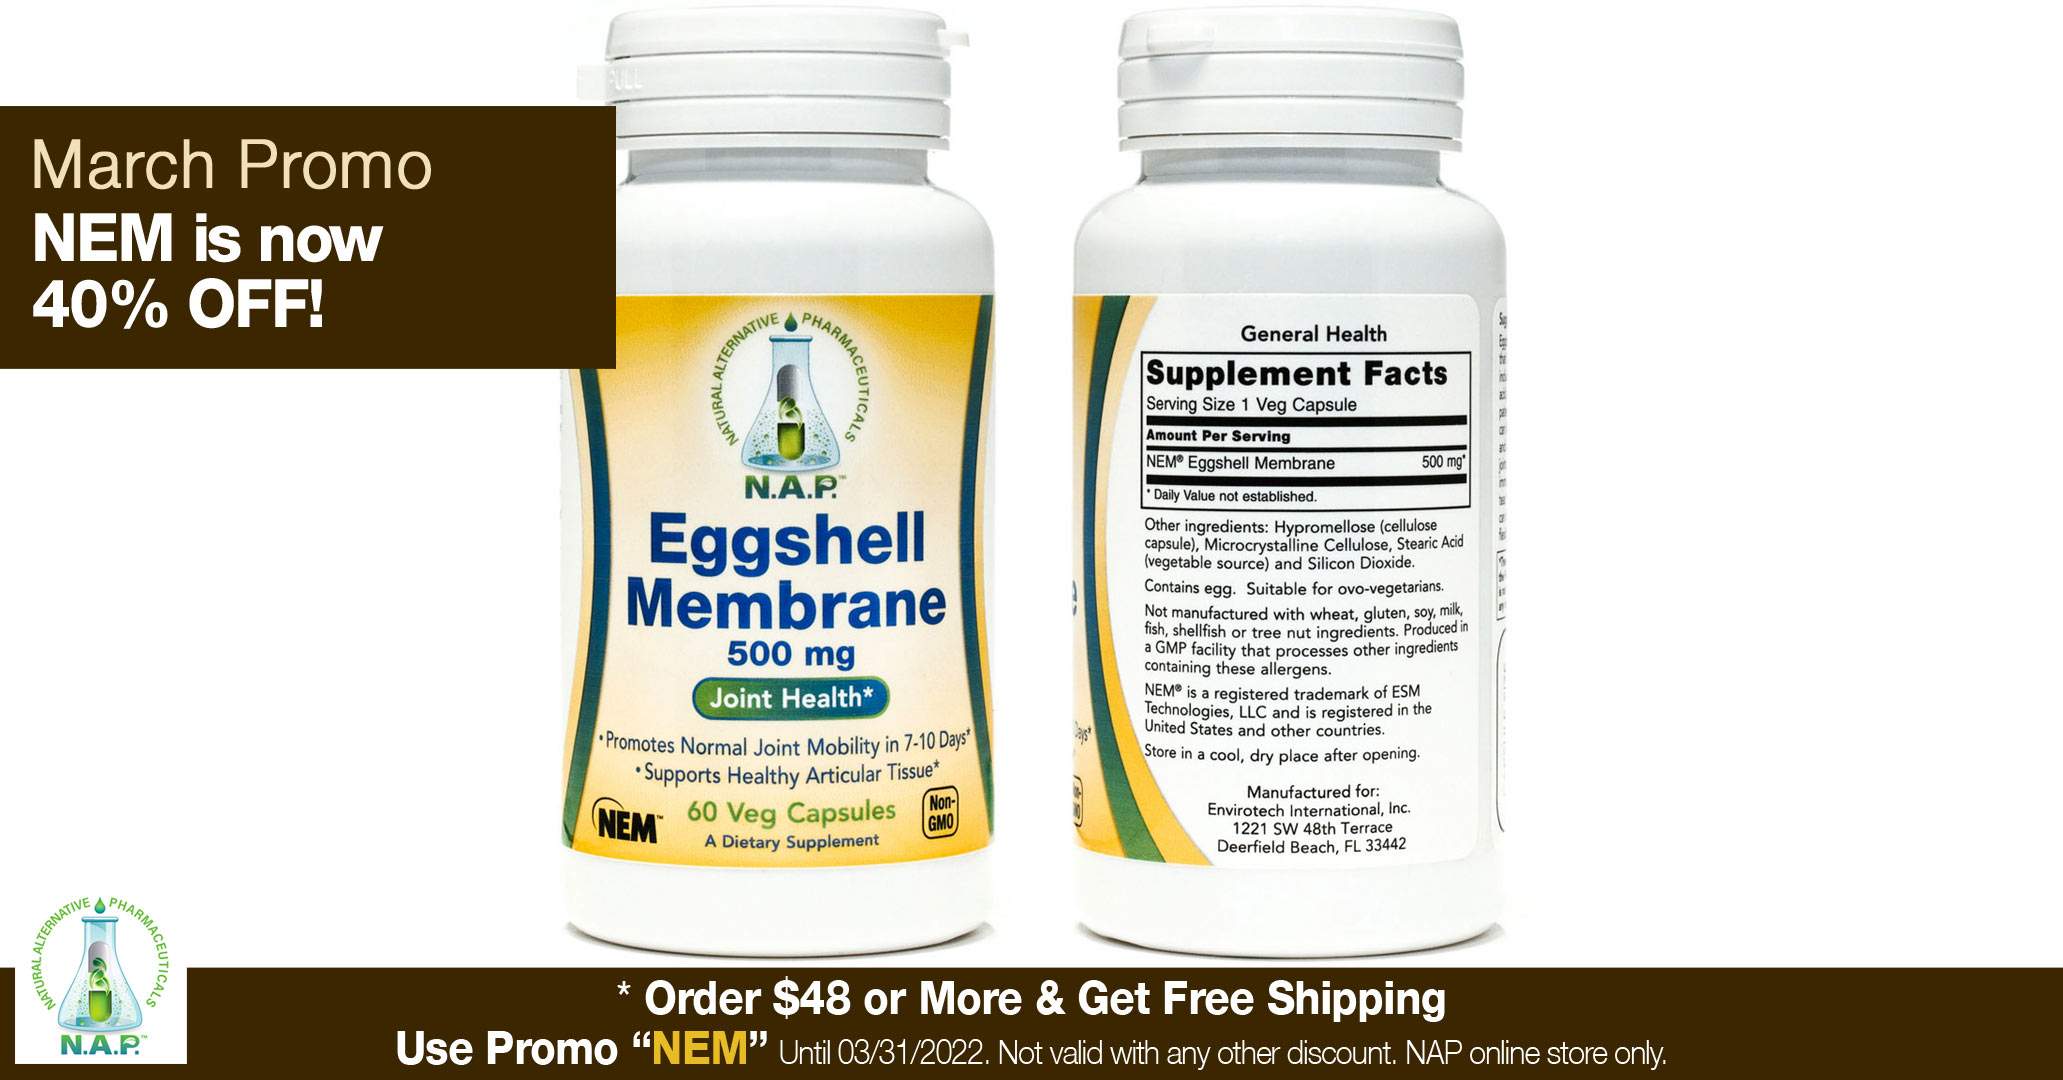 March promotion on Eggshell Membrane Supplements.